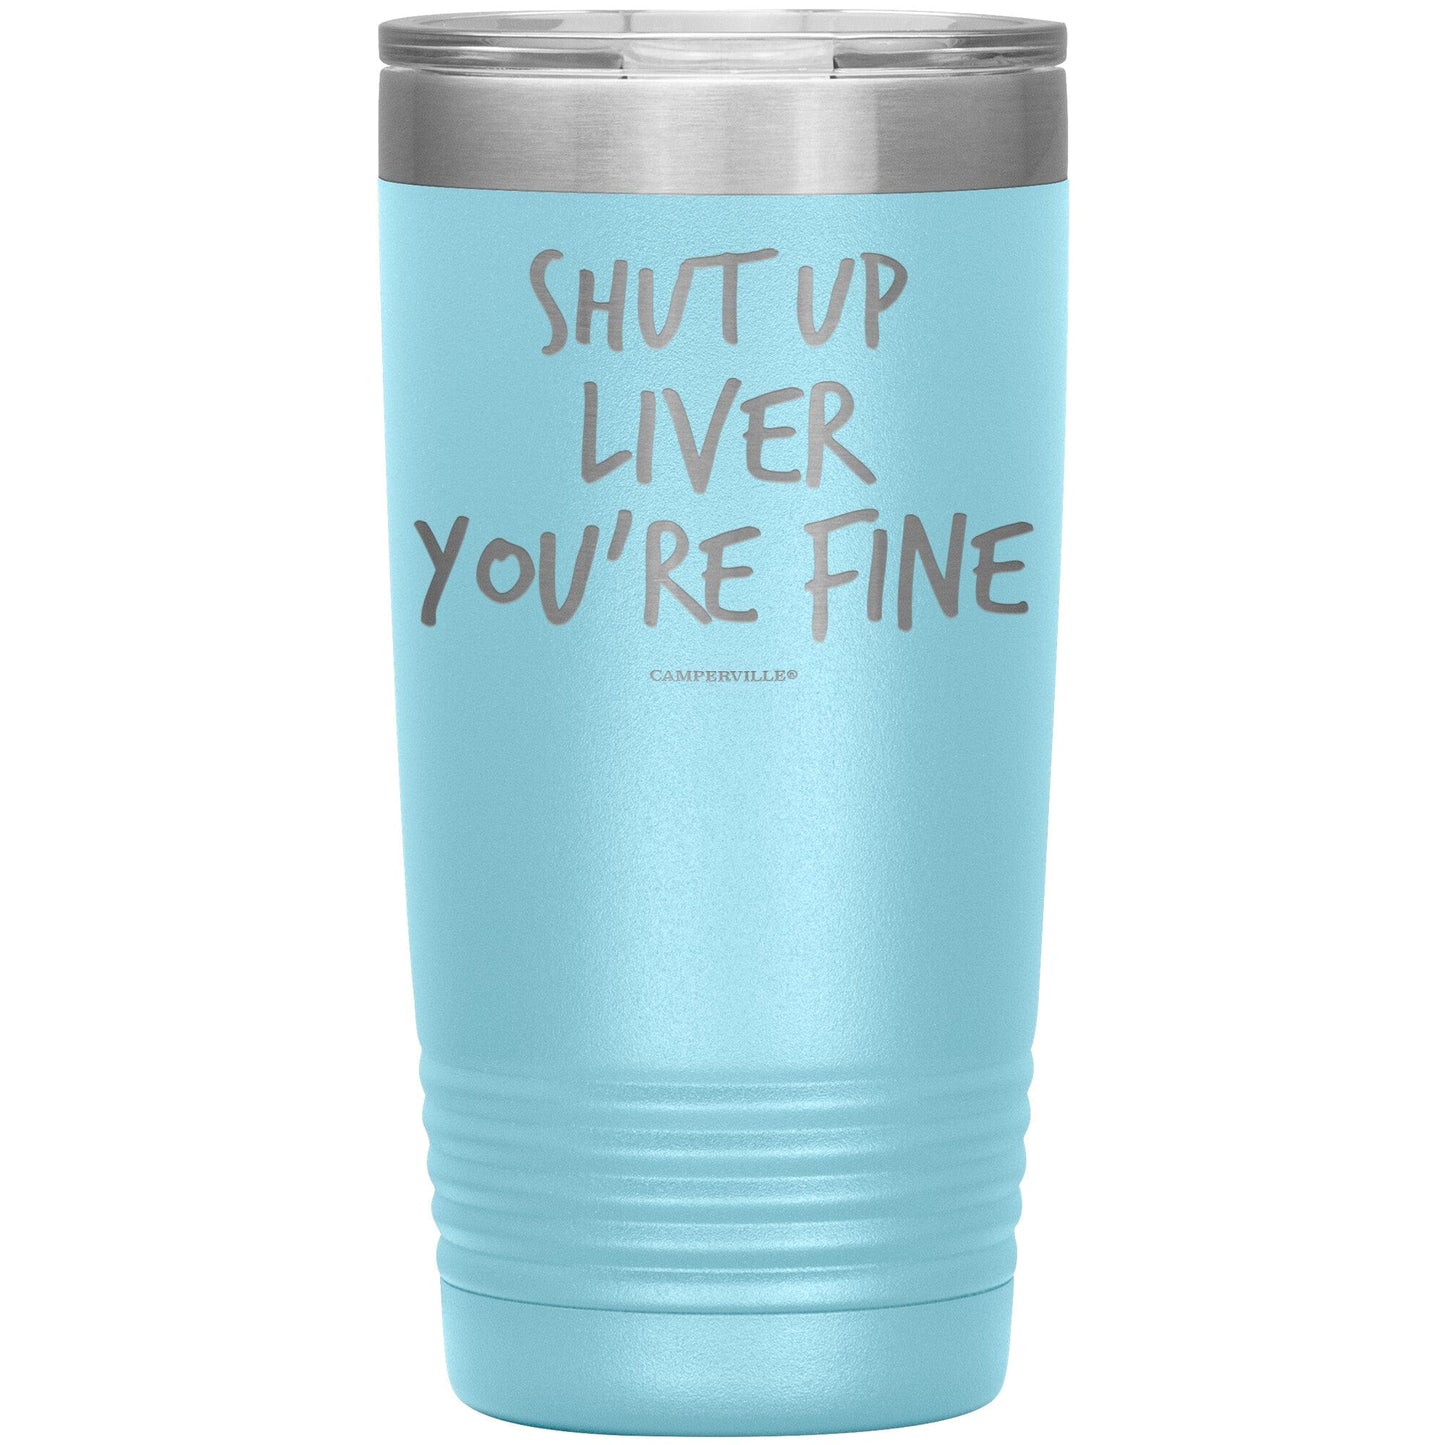 Funny "Shut Up Liver You're Fine" 20oz Stainless Steel Tumbler